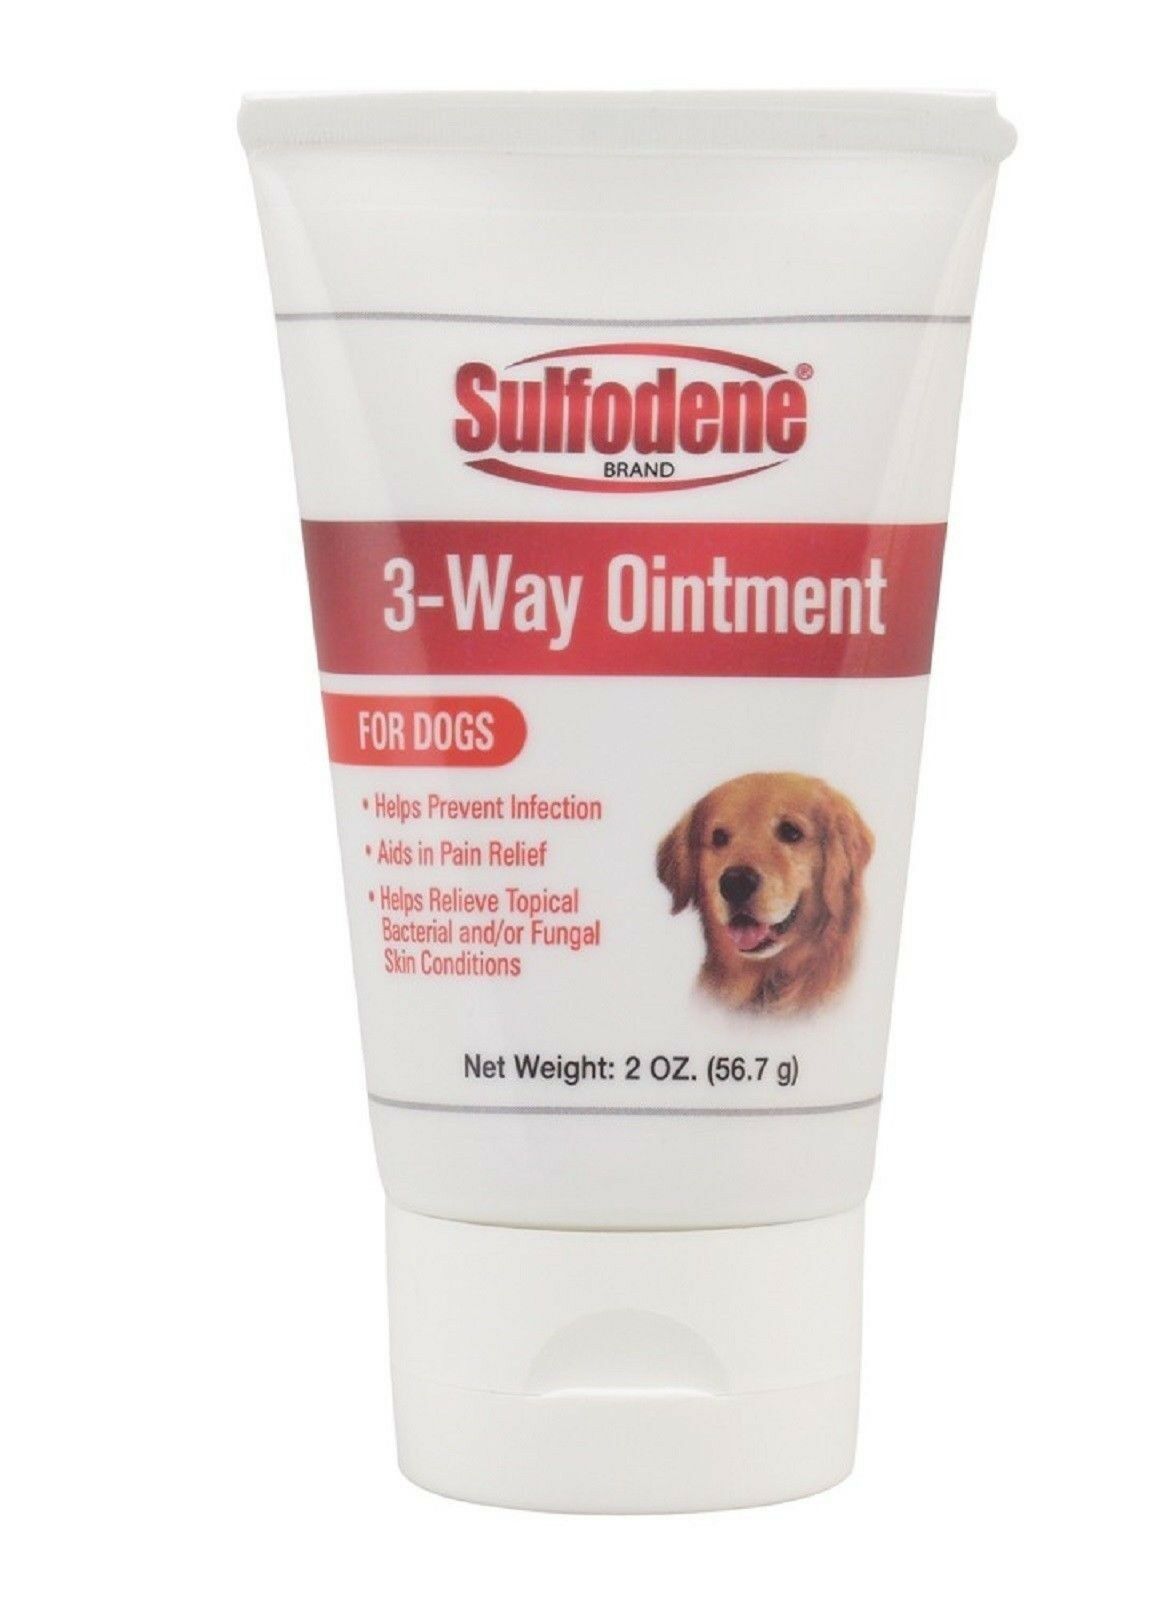 Sulfodene 3-way Ointment For Dogs 2oz